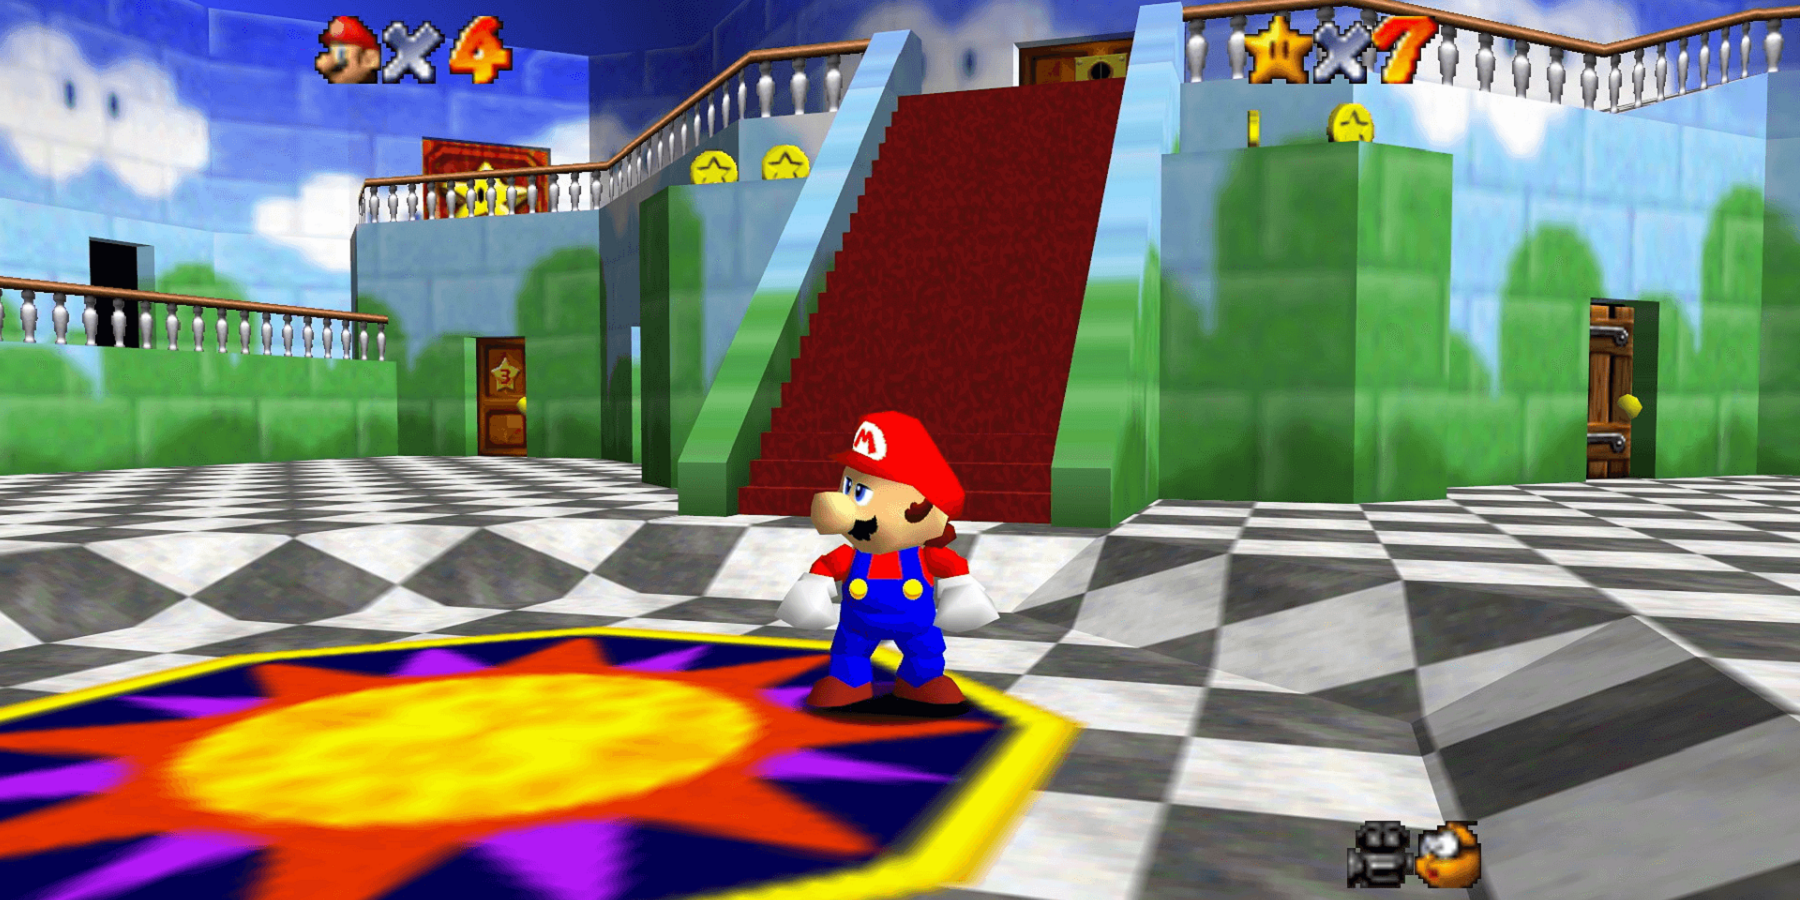 Screenshot from Super Mario 64 showing Mario inside the castle.